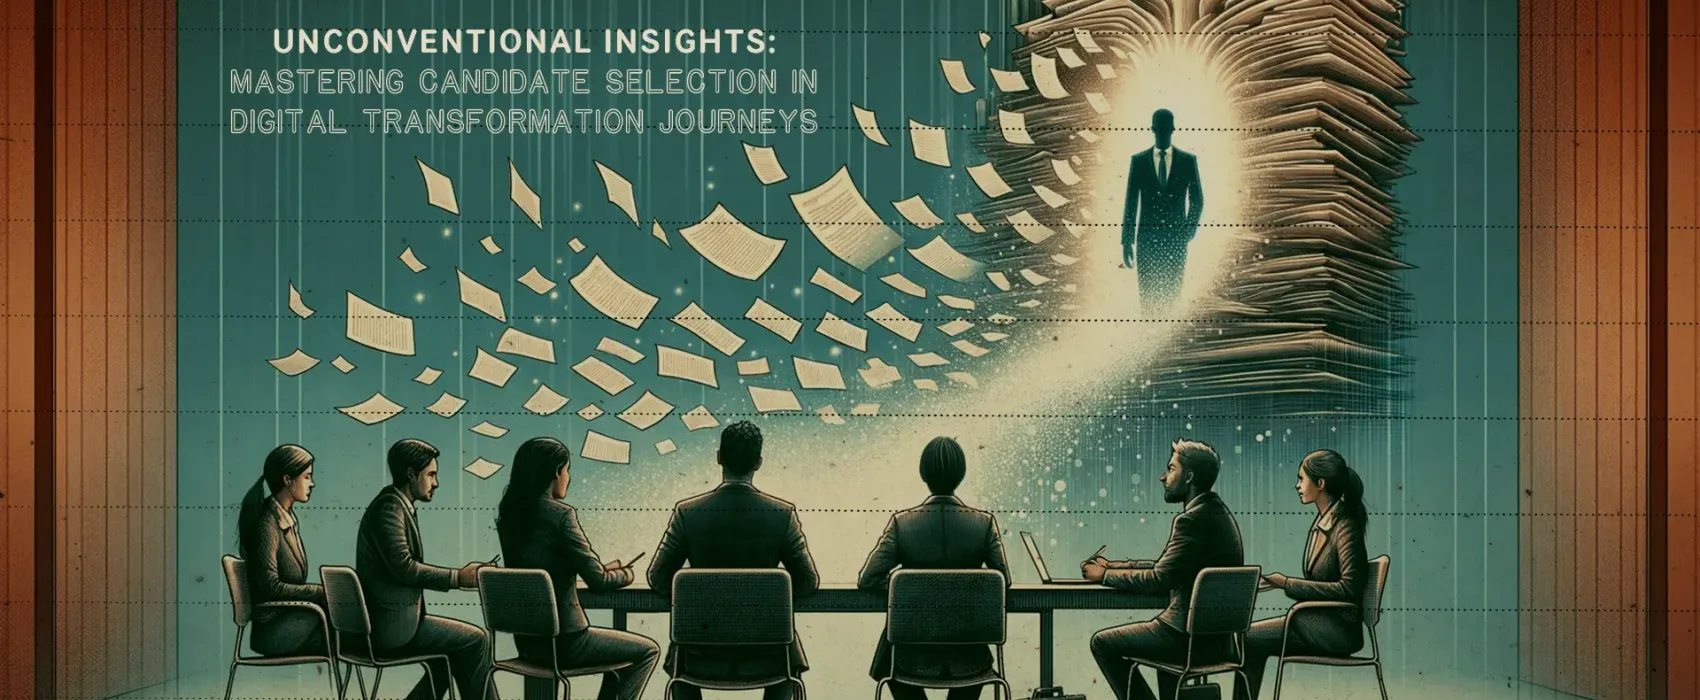 Unconventional Insights: Mastering Candidate Selection in Digital Transformation Journeys